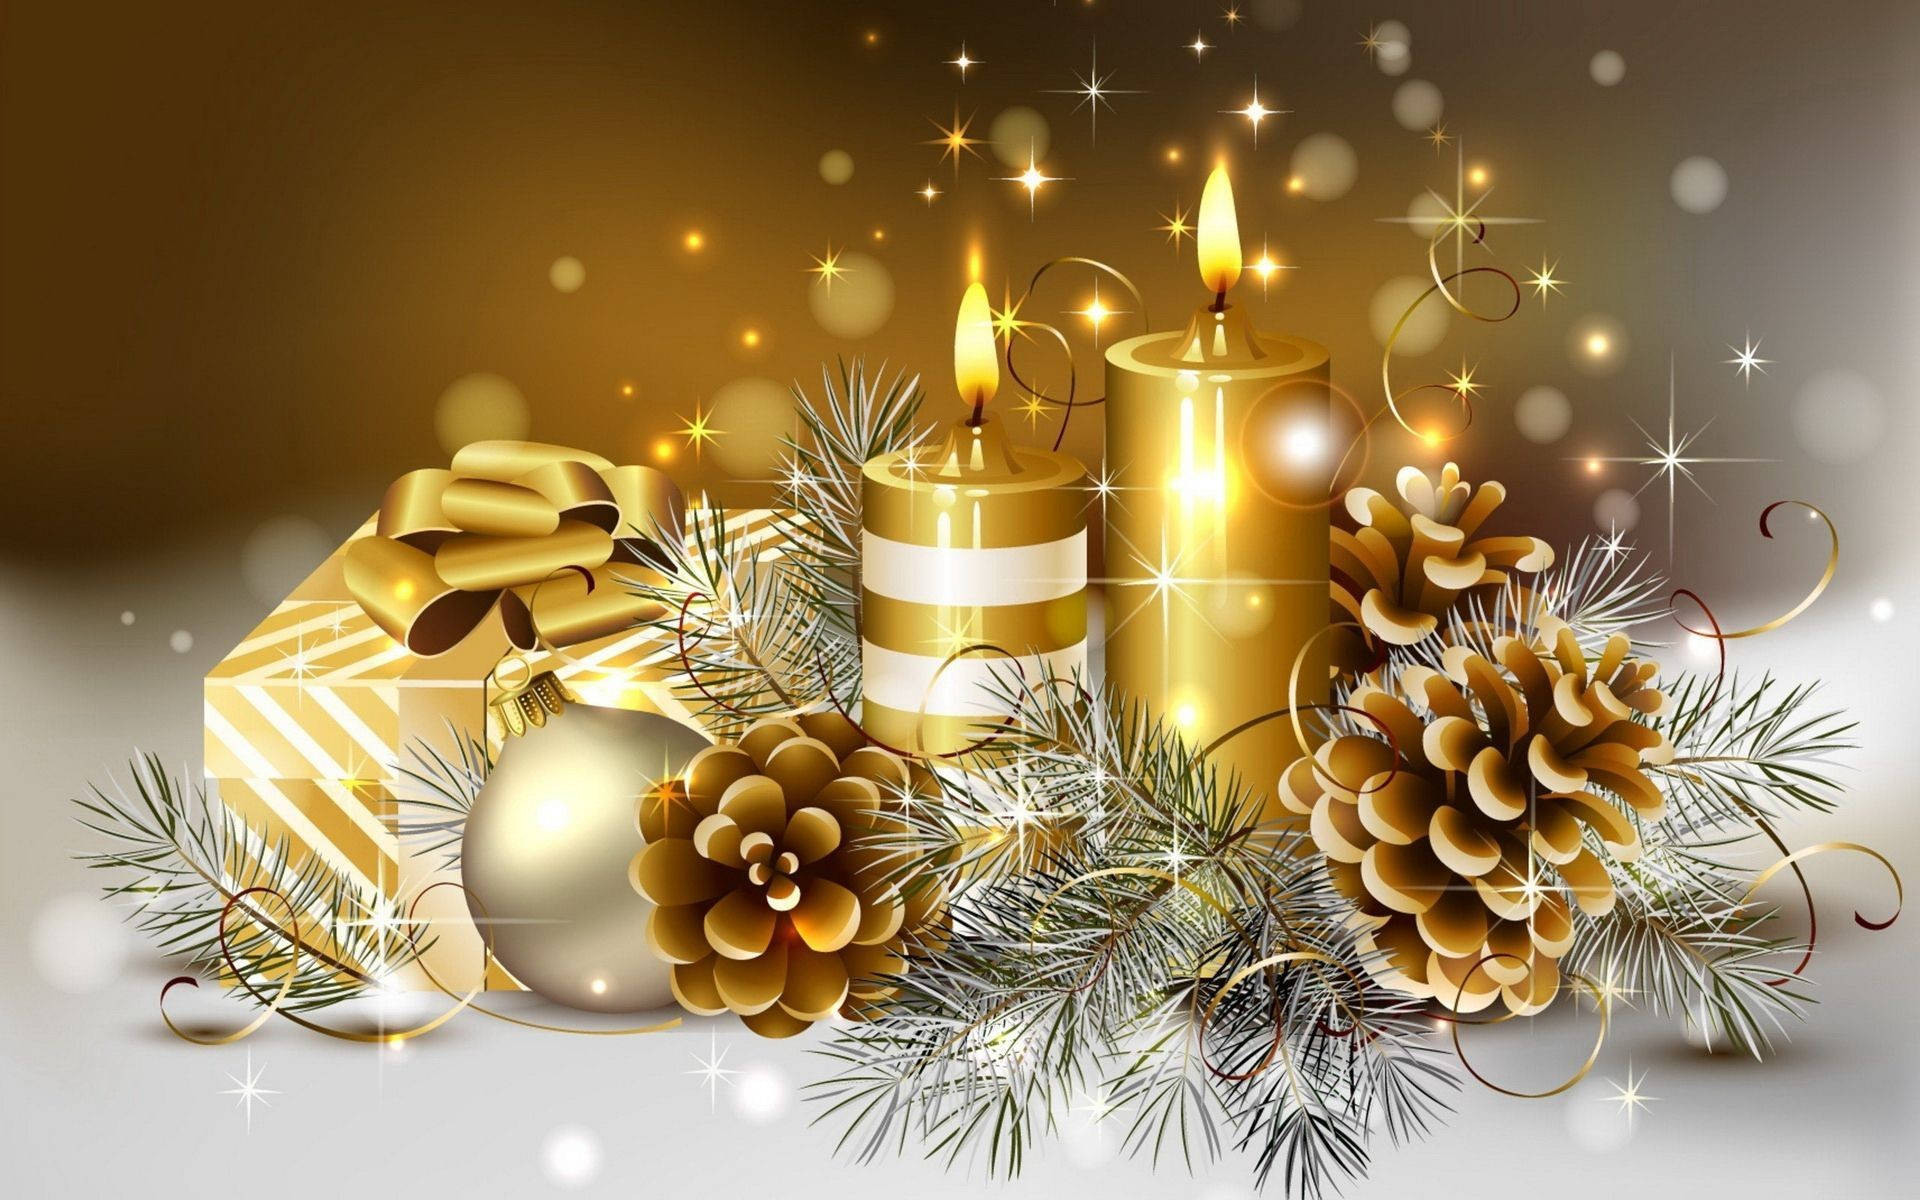 Merry Christmas Hd Golden Candles Background